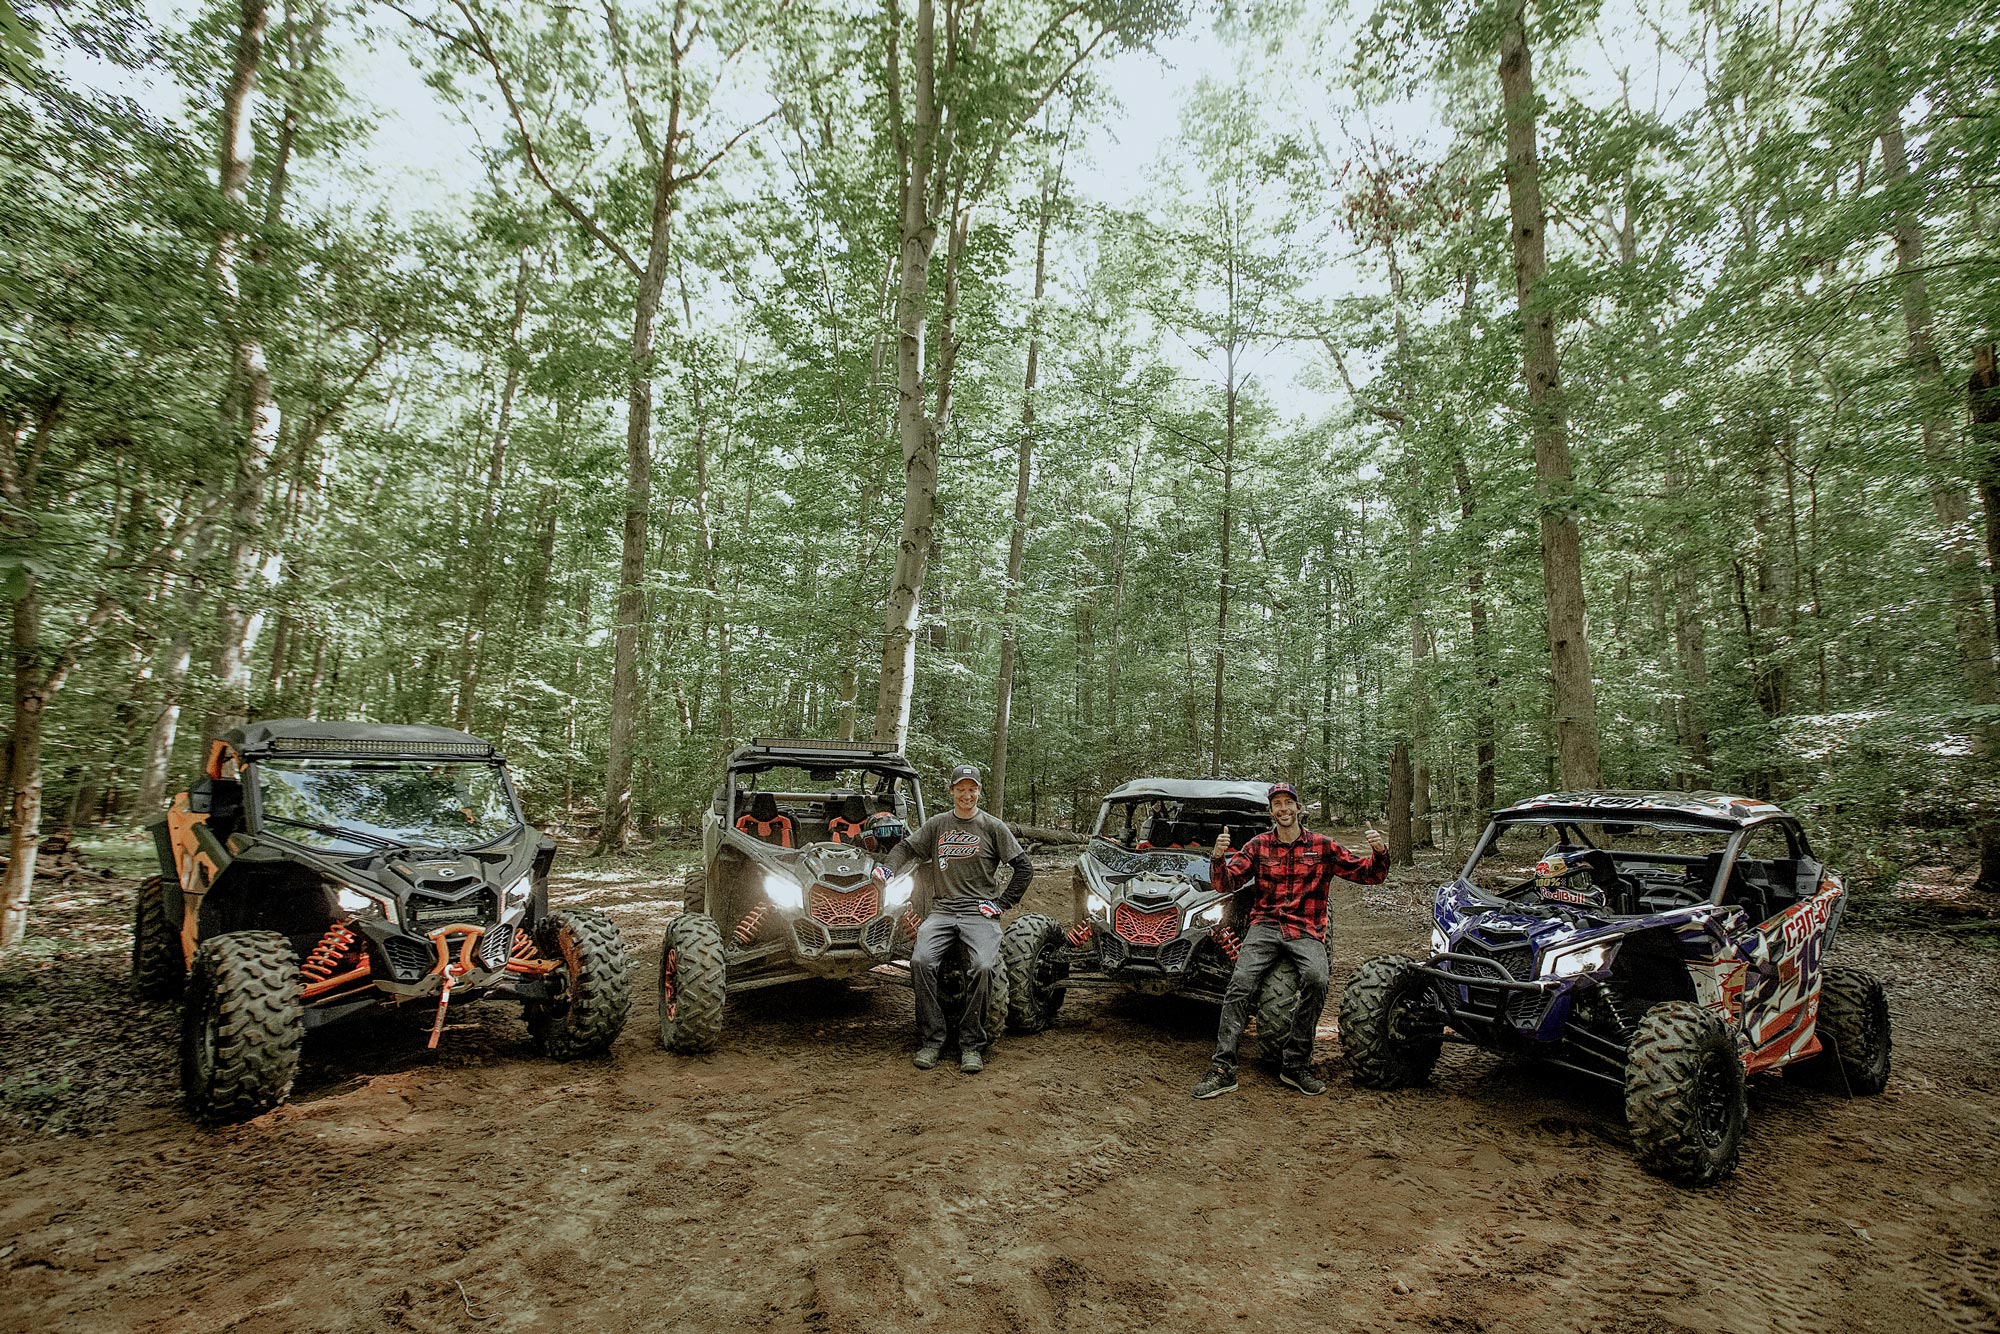 Two men and four Can-Am side-by-sides in a forest